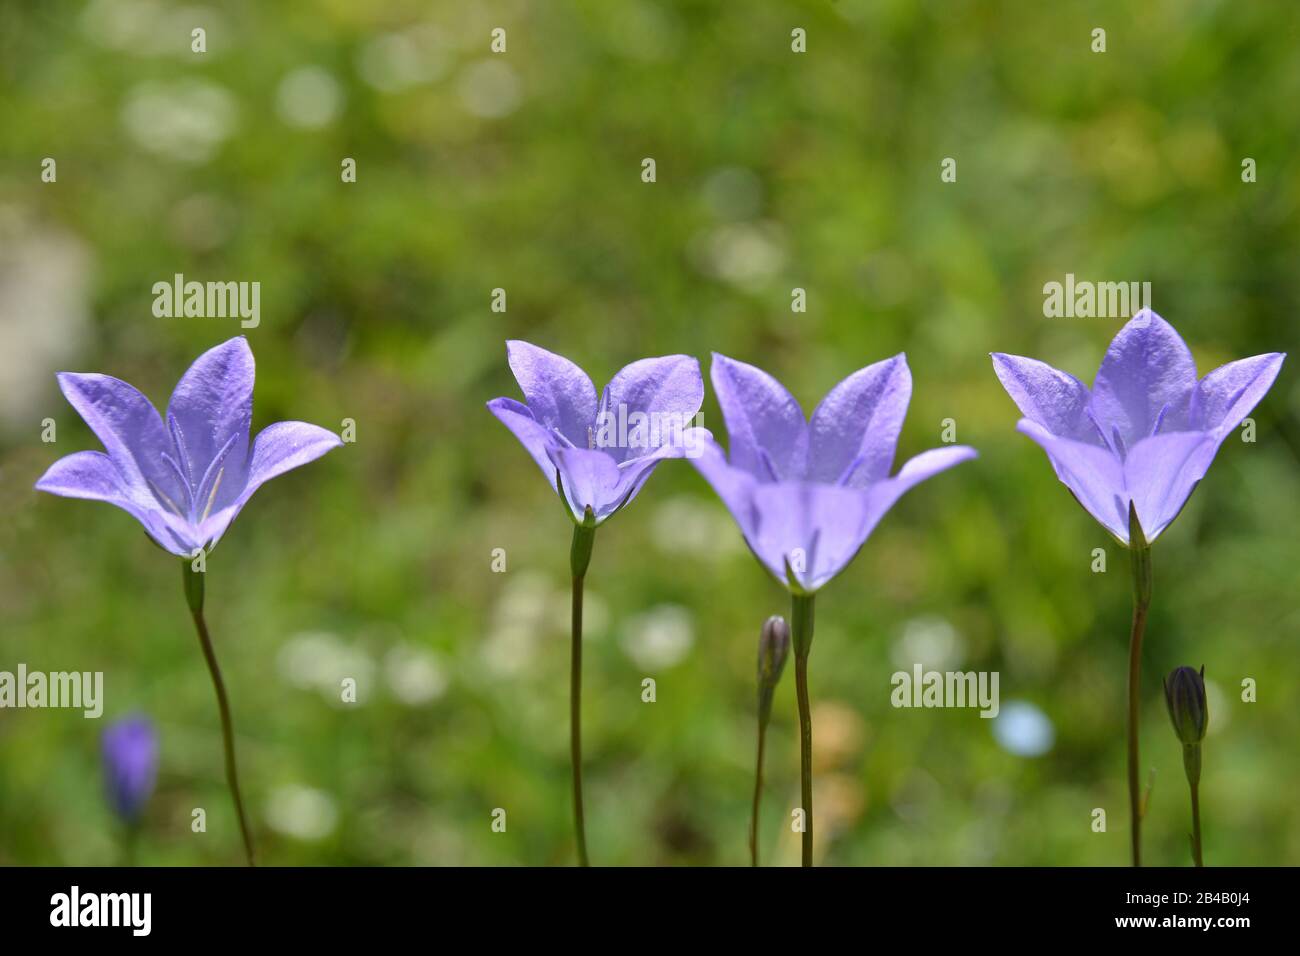 Several violet sunlit  bellflowers are outlined against natural green blur background. Stock Photo